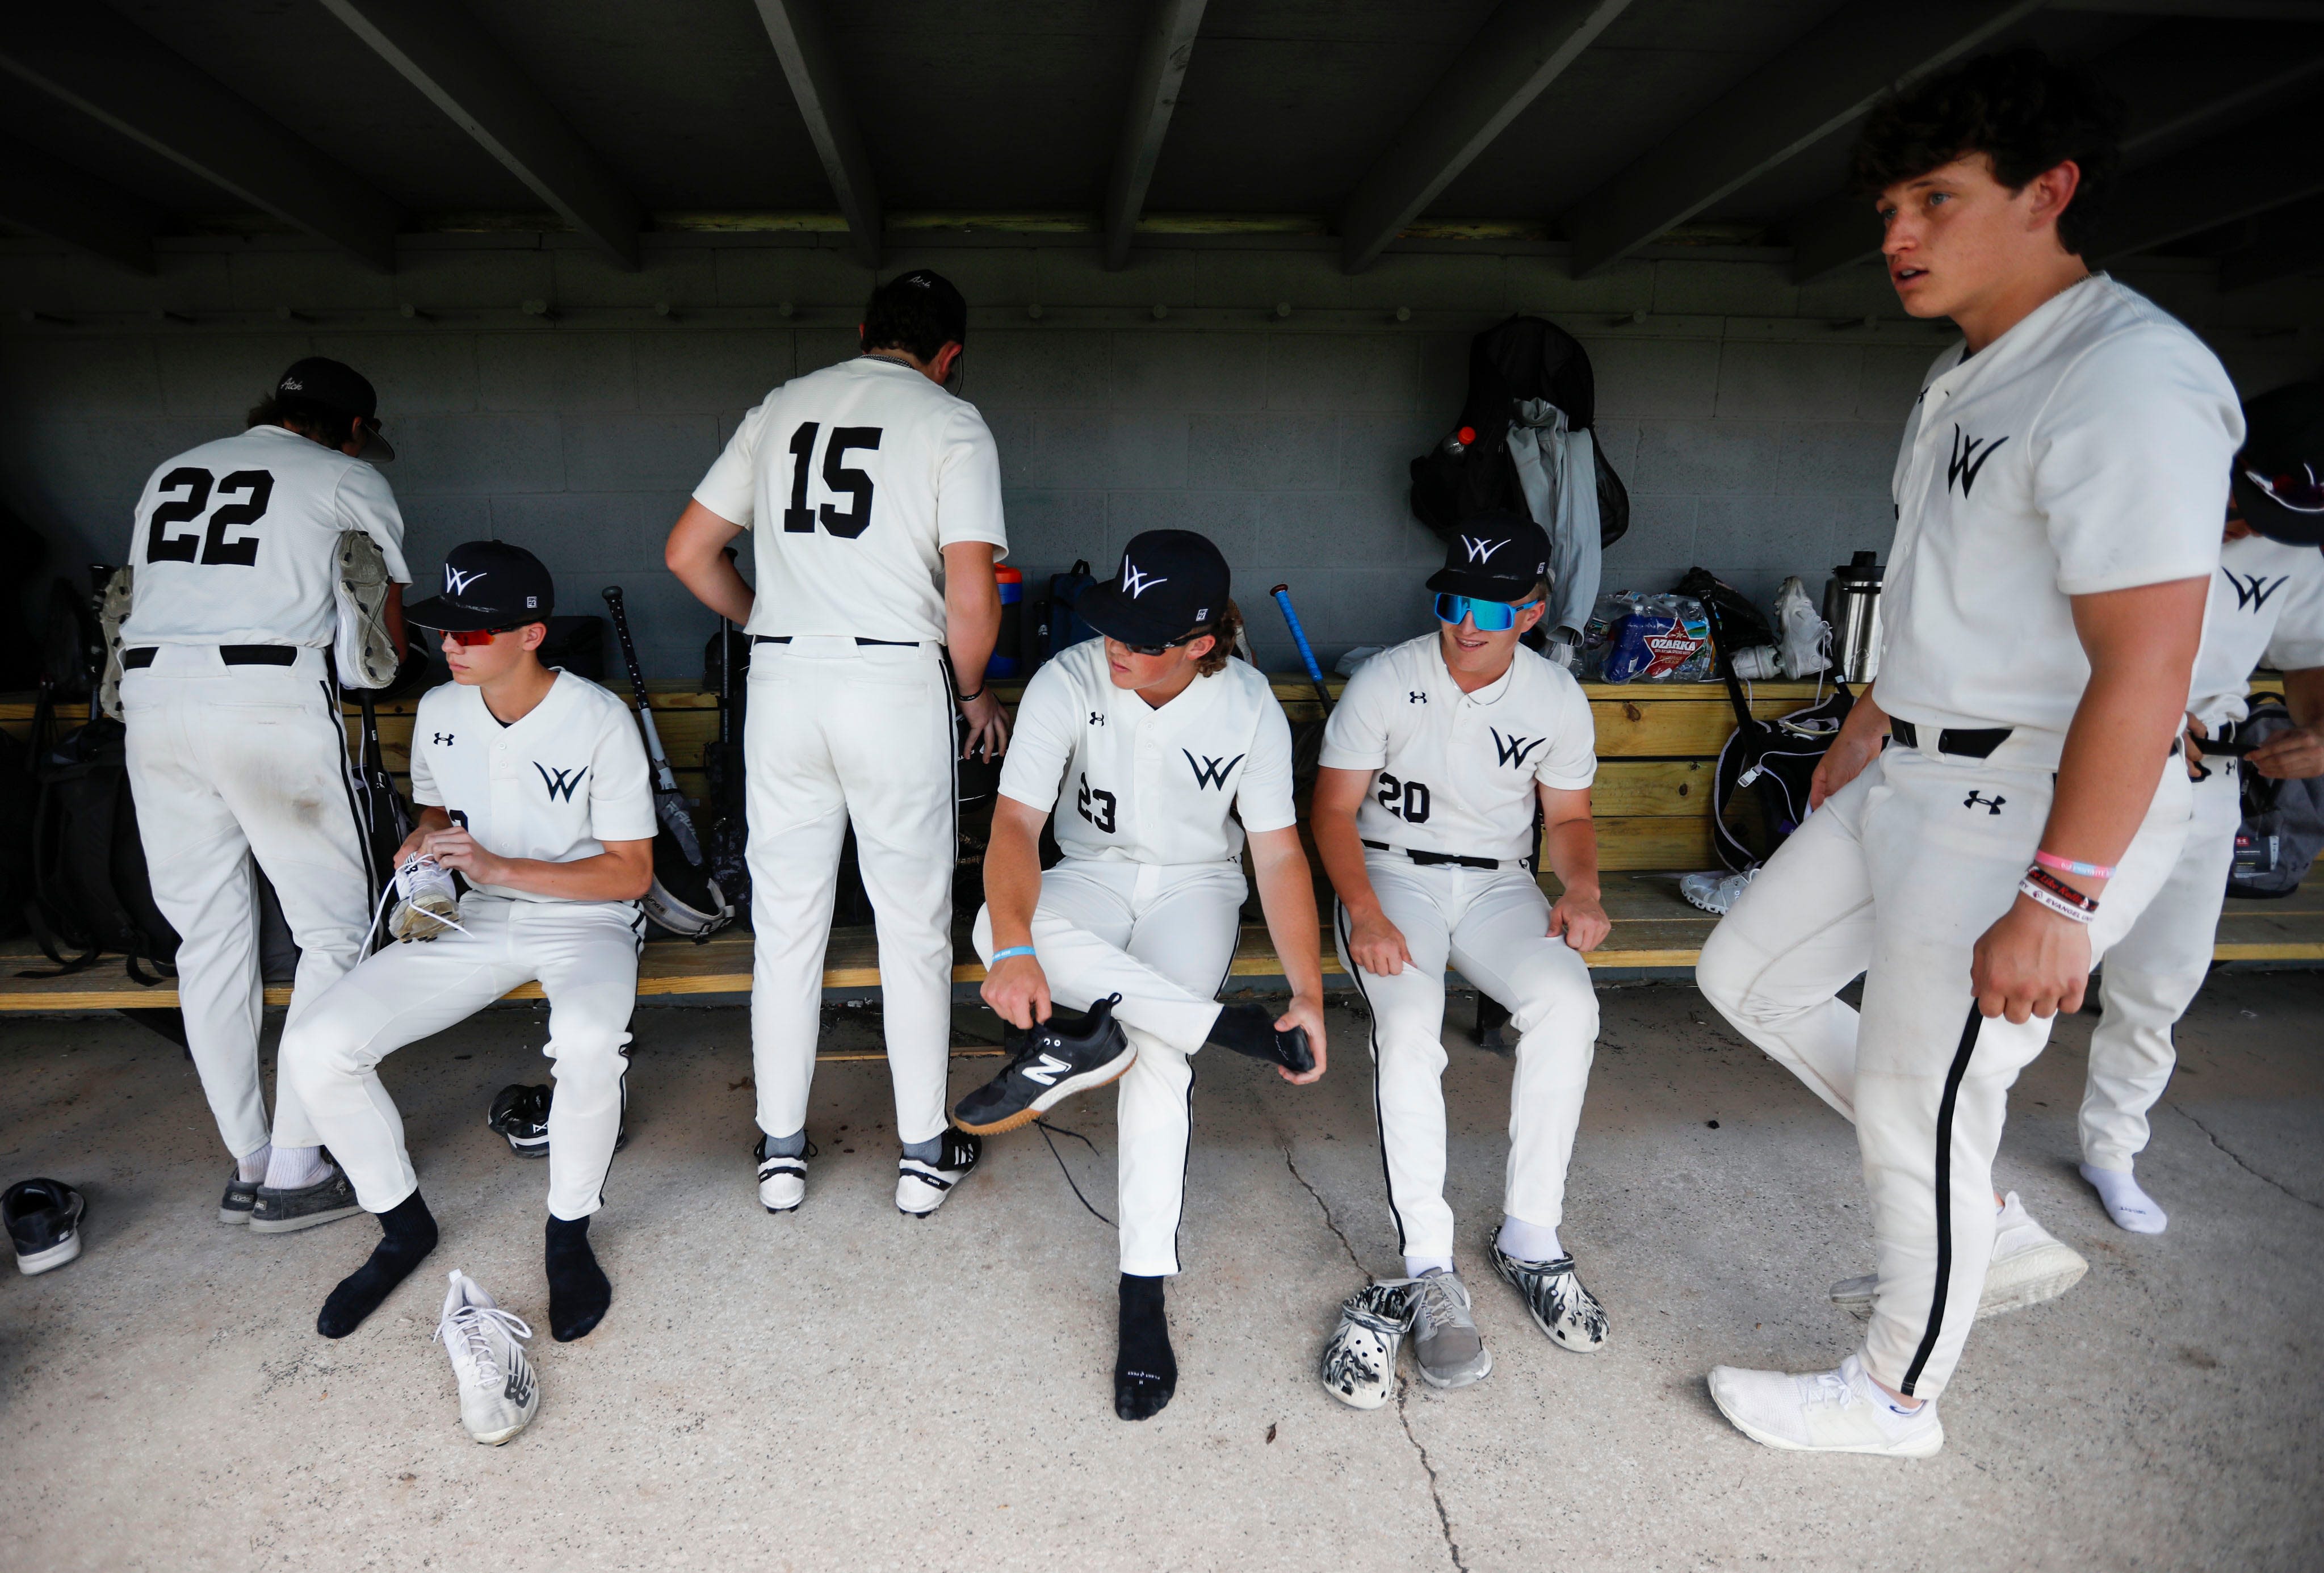 Willard baseball in Class 5 semifinals: What to know about Tigers' state appearance